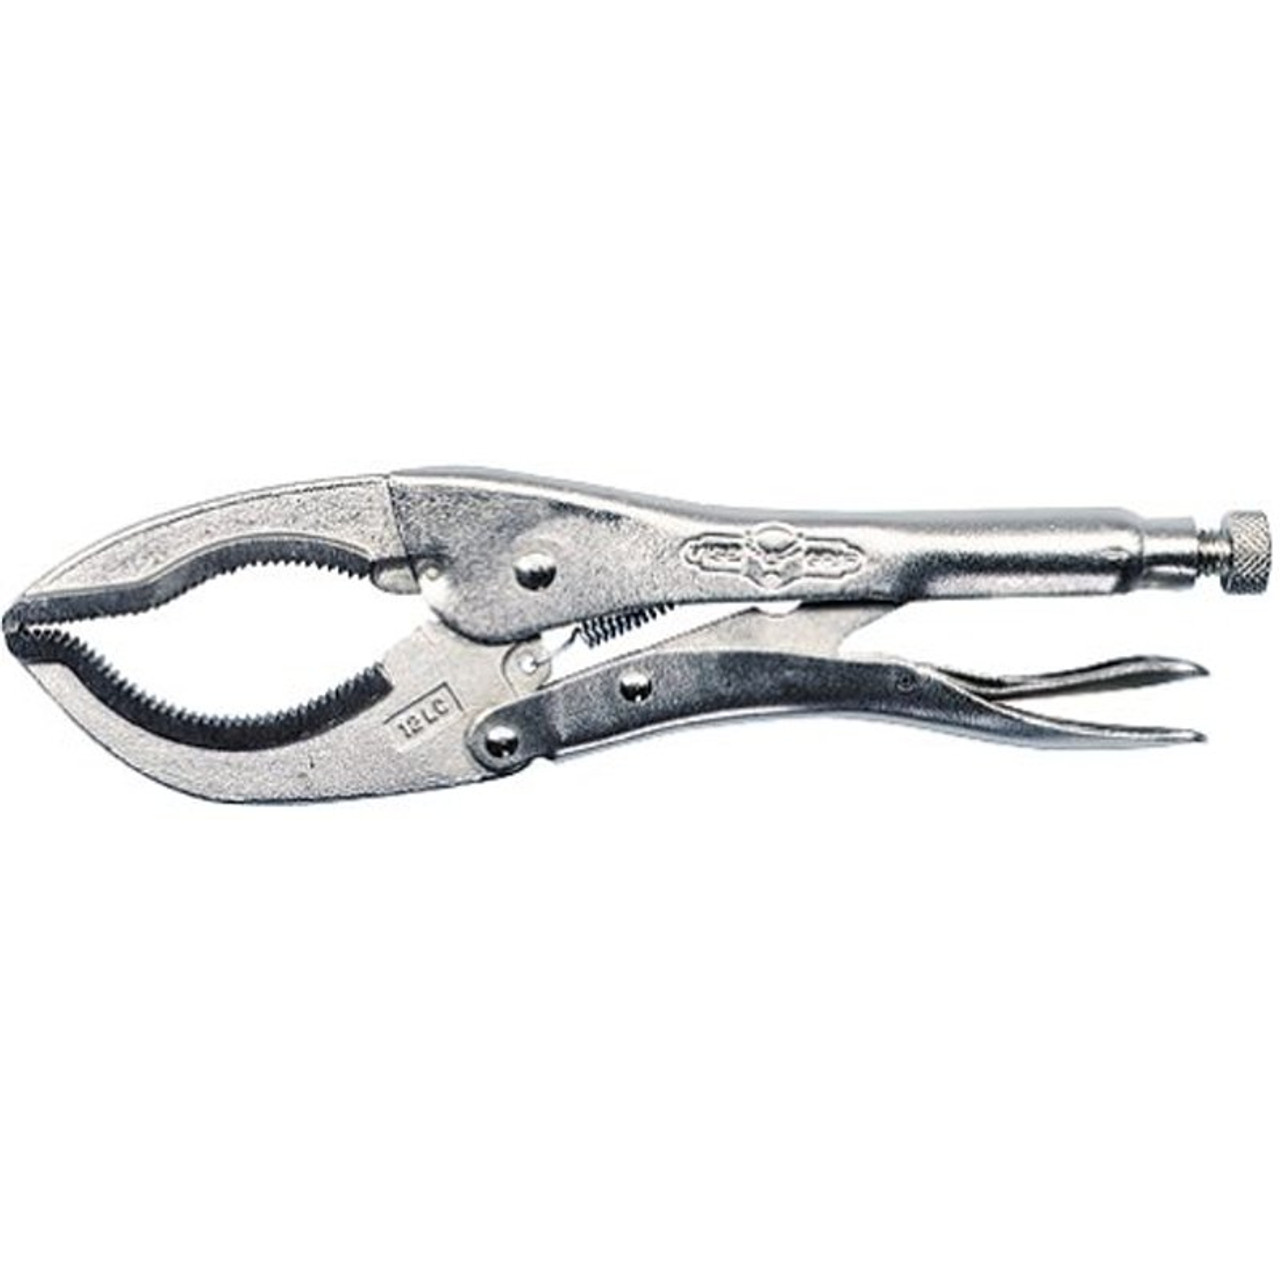 7 Vise-Grip Locking Pliers Curved Jaw with Wire Cutter Heavy Duty